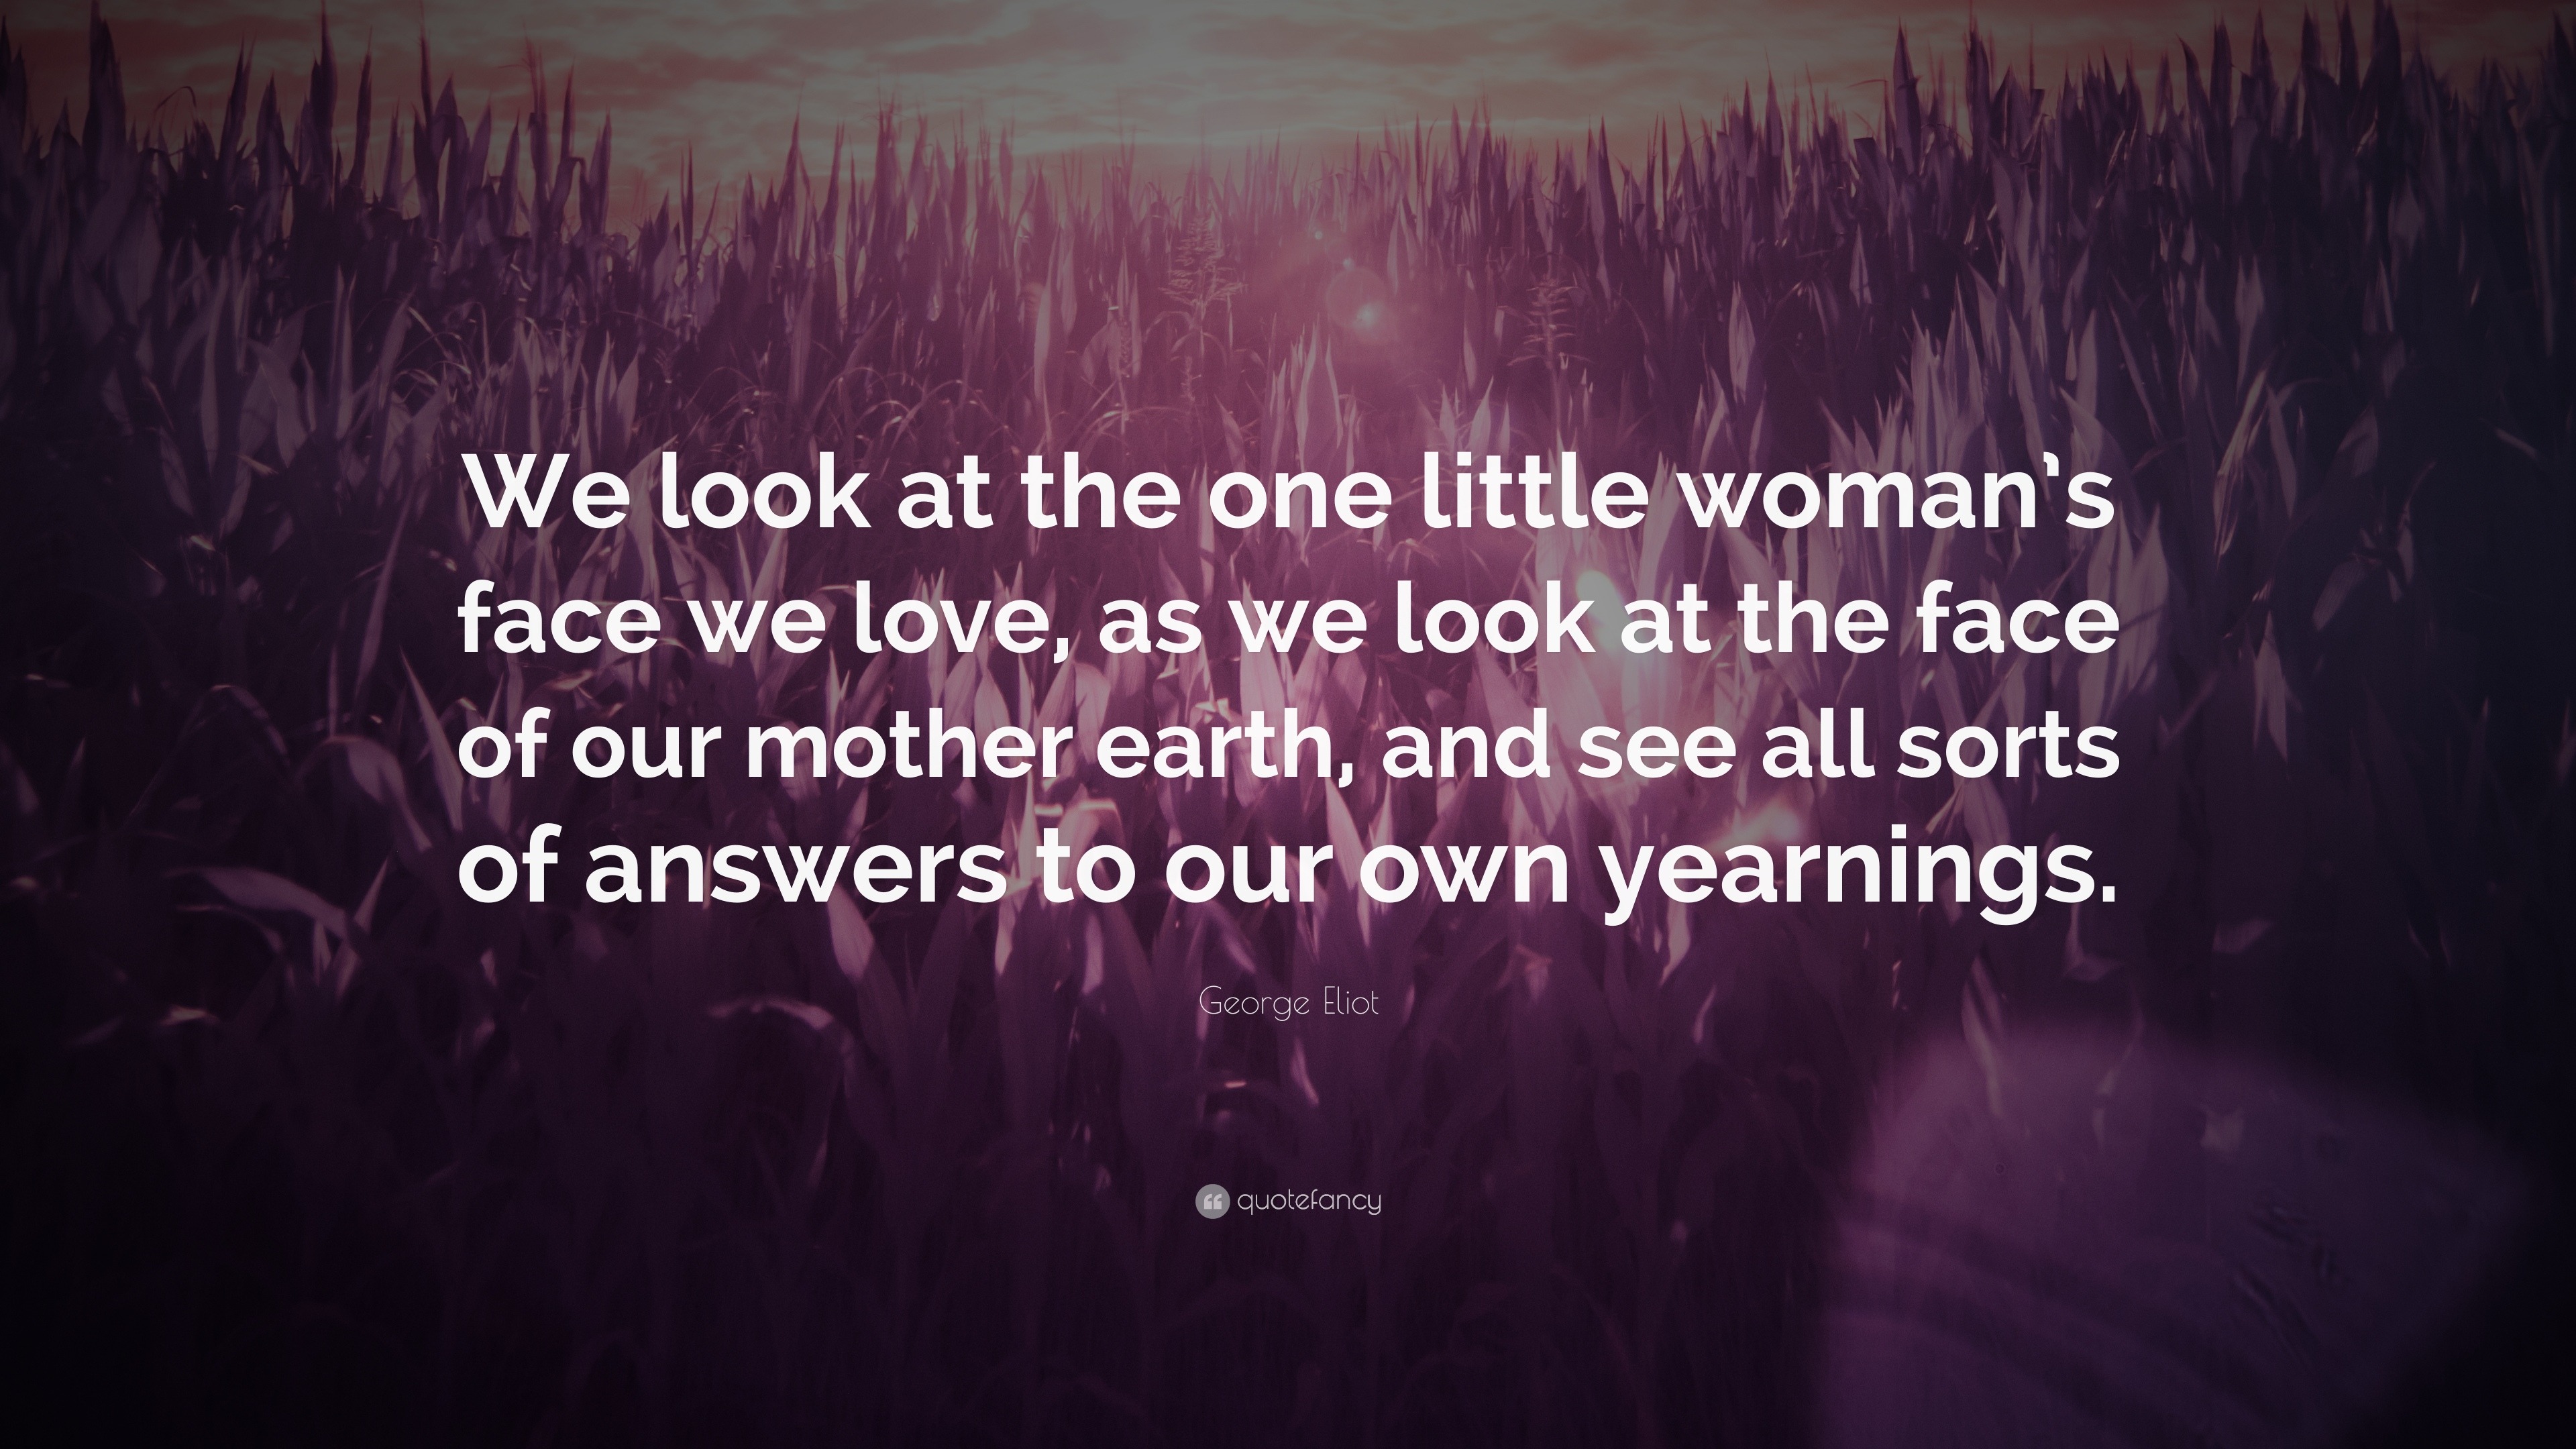 George Eliot Quote “We look at the one little woman s face we love